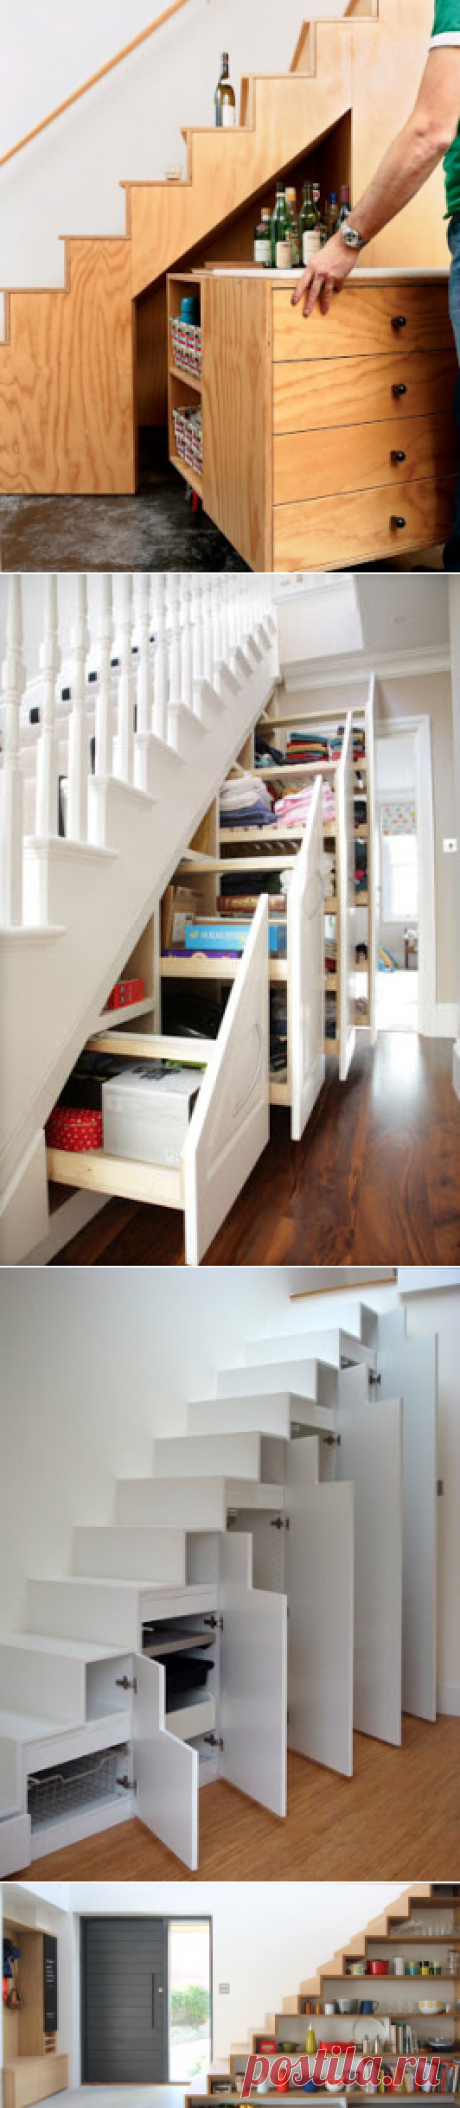 15 Creative and Clever Under Stair Storage Designs.